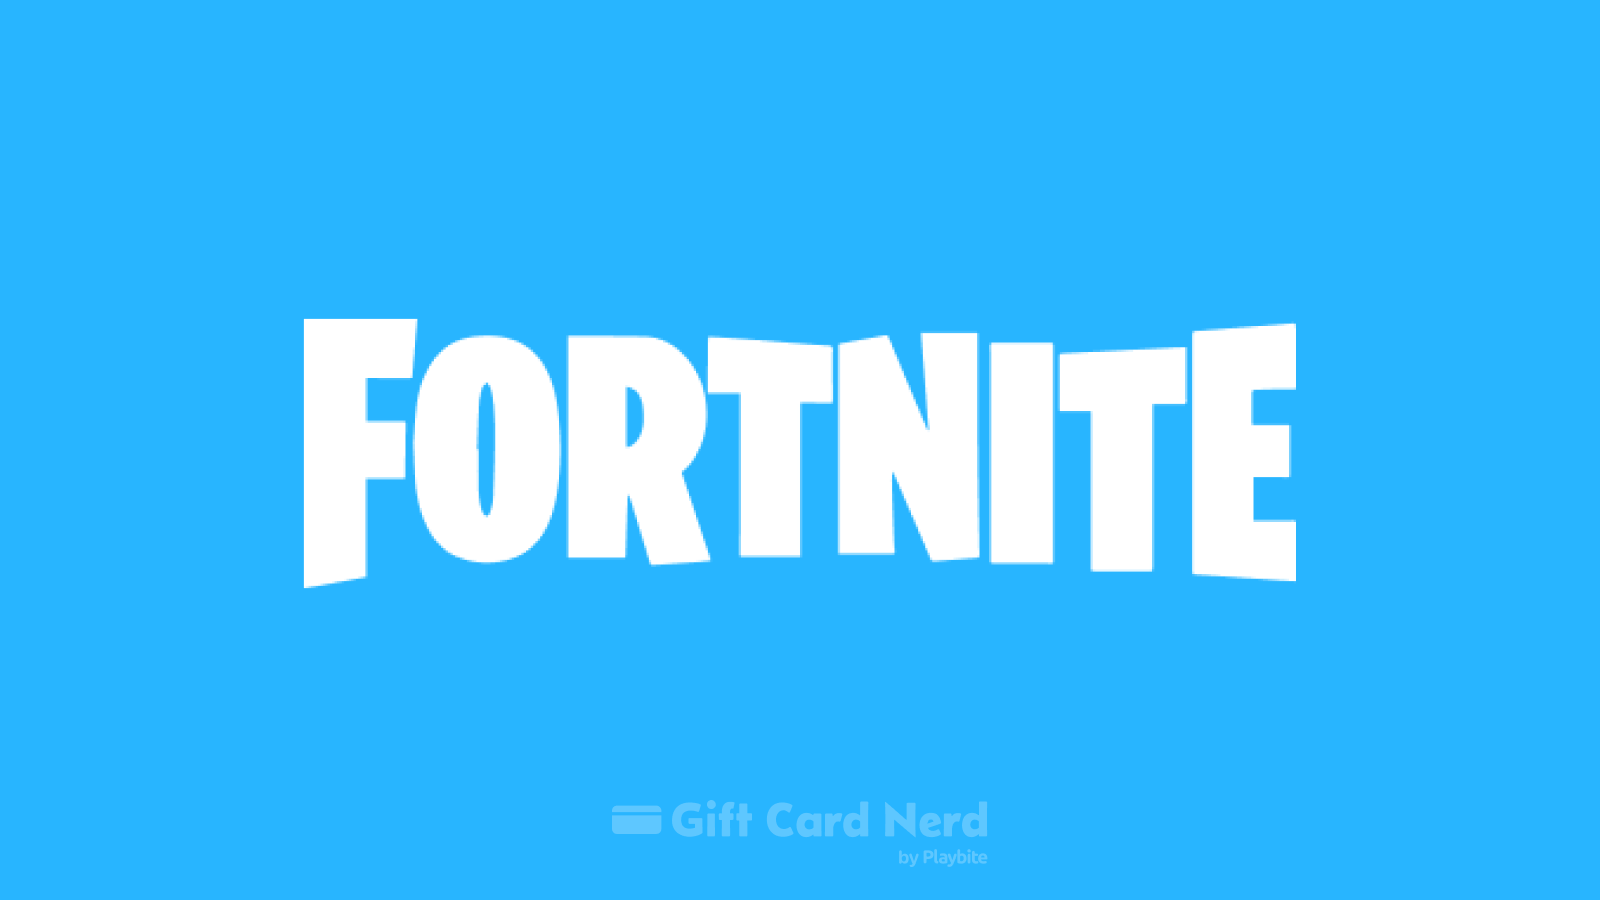 Can You Use a Fortnite Gift Card on Steam?